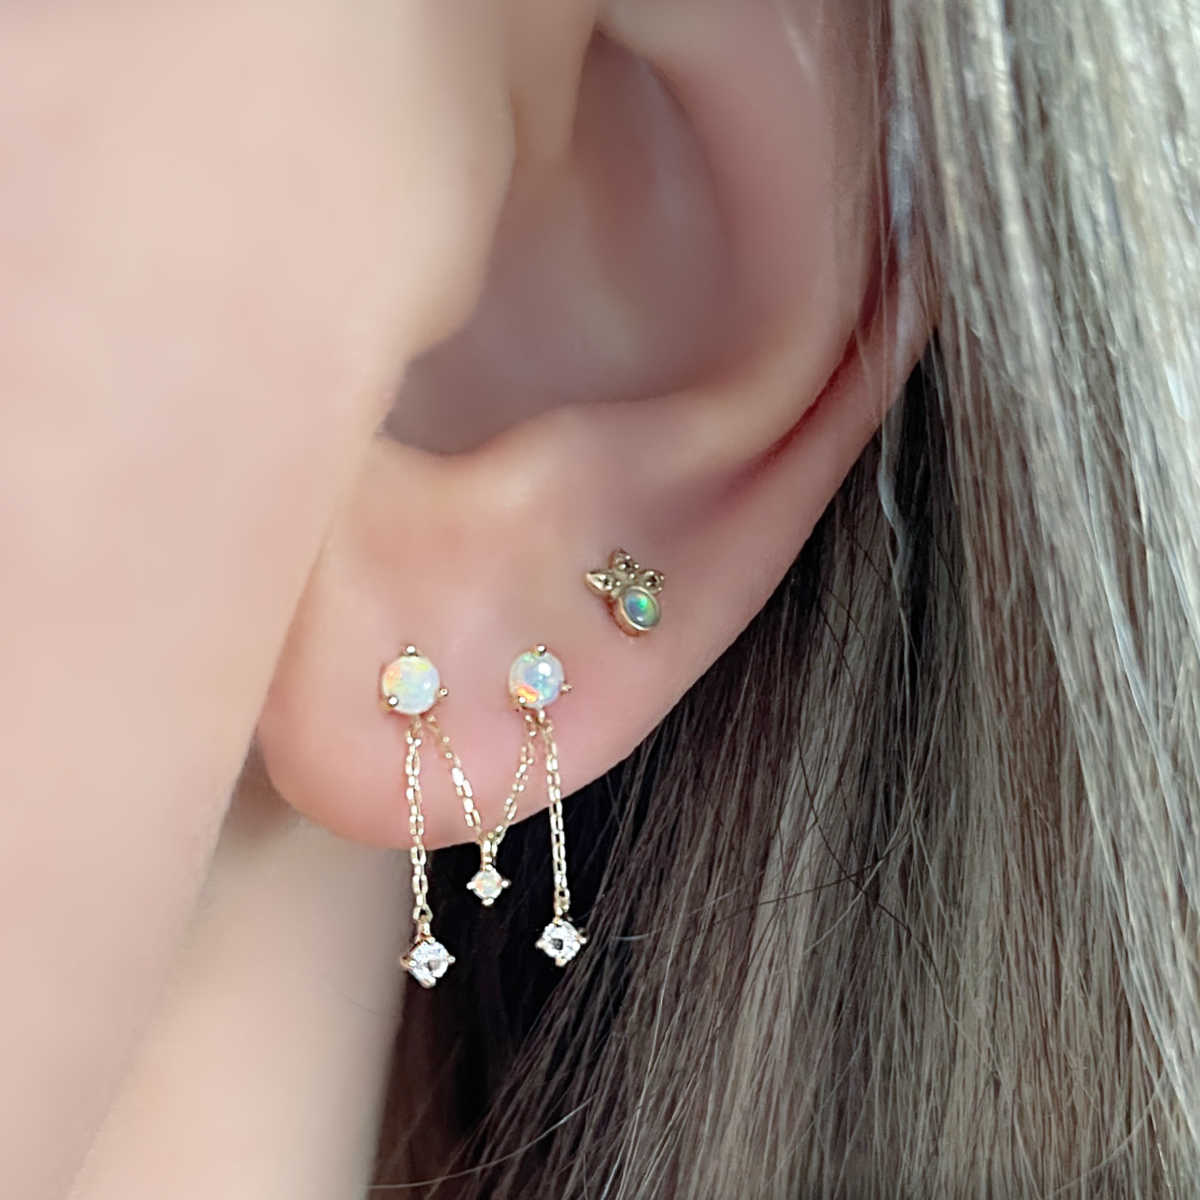 Opal Chain Drop Earrings | 14k Gold Studs from Two of Most